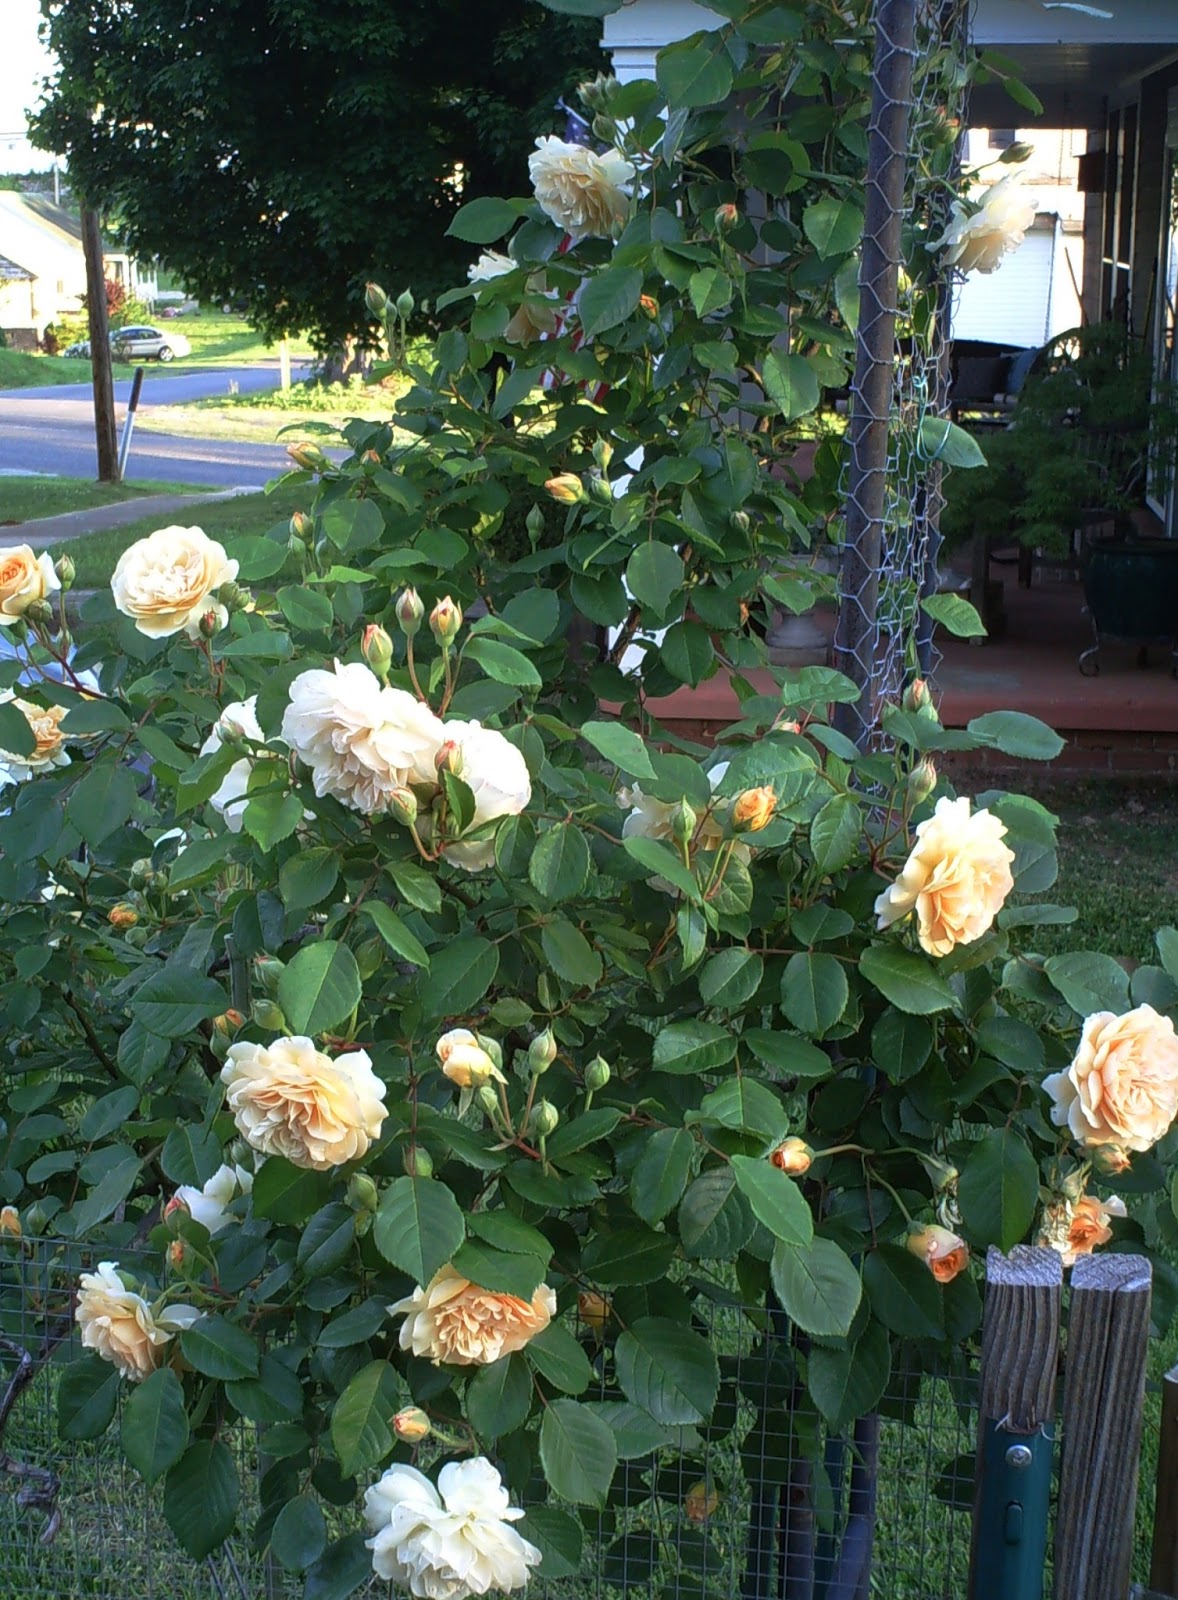 Where the Catbird Sings: ROSES IN THE SOUTHERN GARDEN